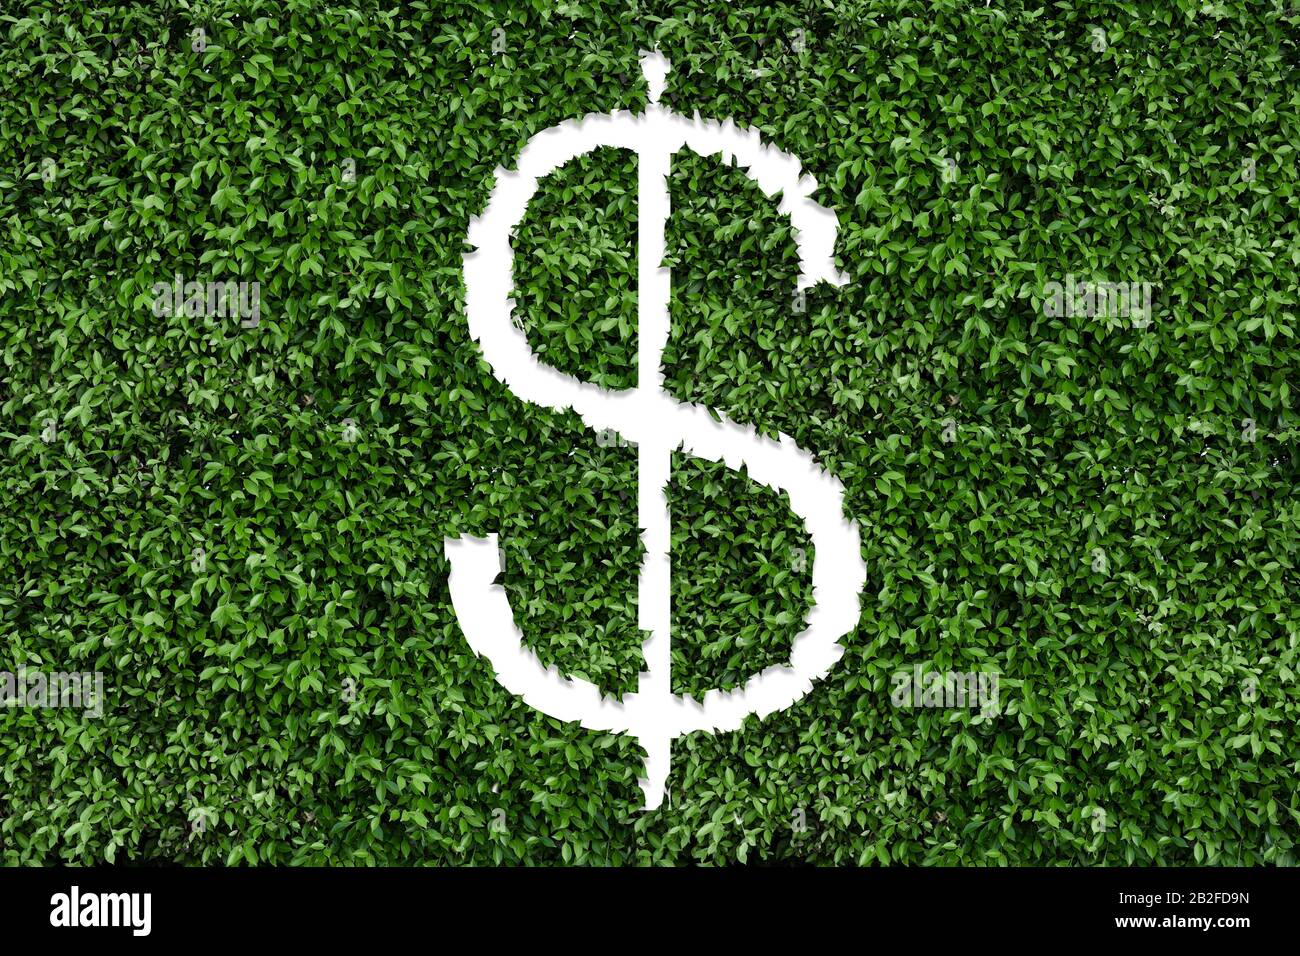 Green plant in shape of dollar sign grows at green field. Friendly ecosystem for business and investment. Banking and foreign exchange market. Stock Photo